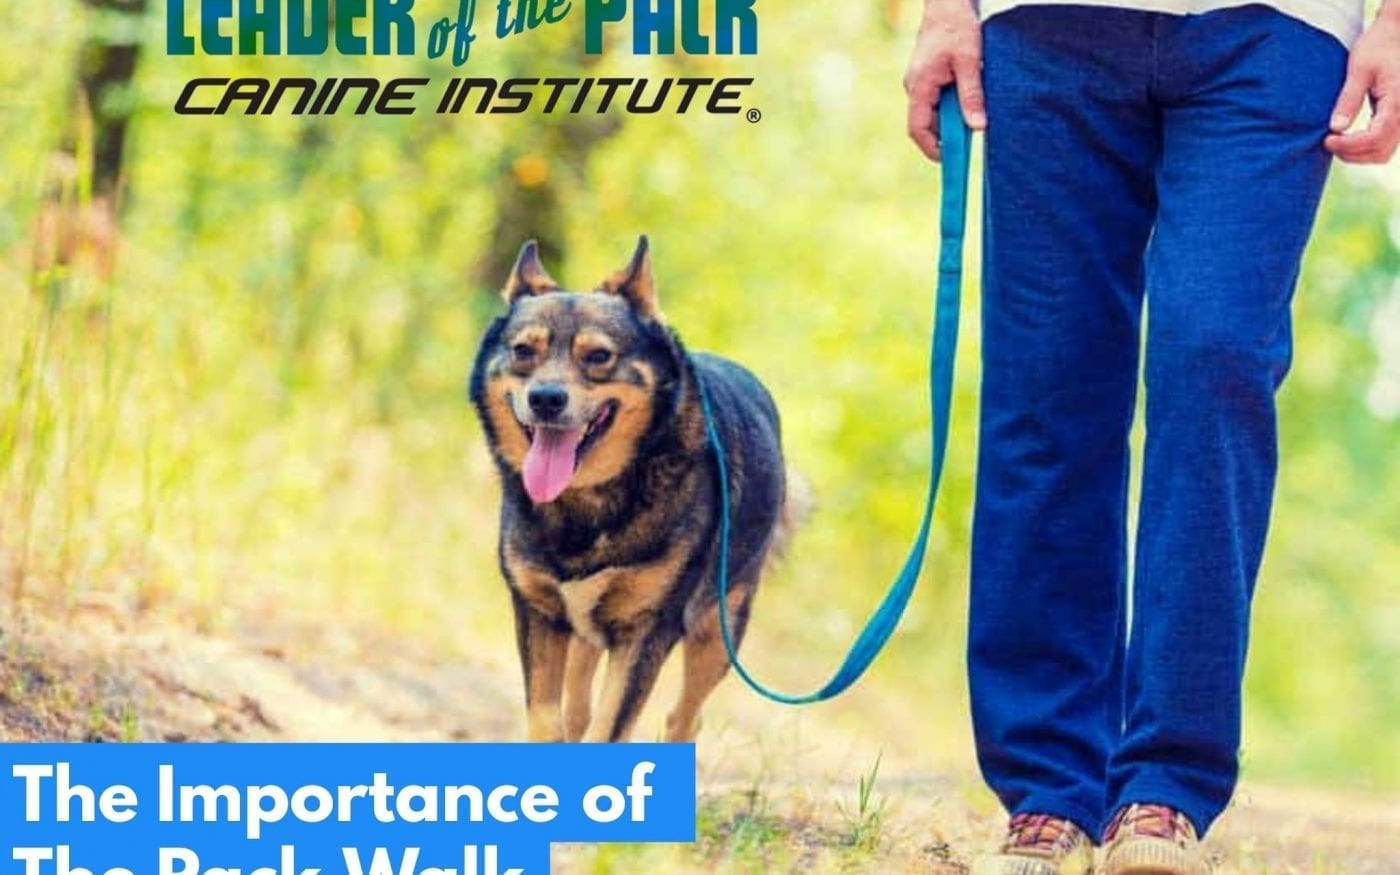 Dog training designed for your puppy